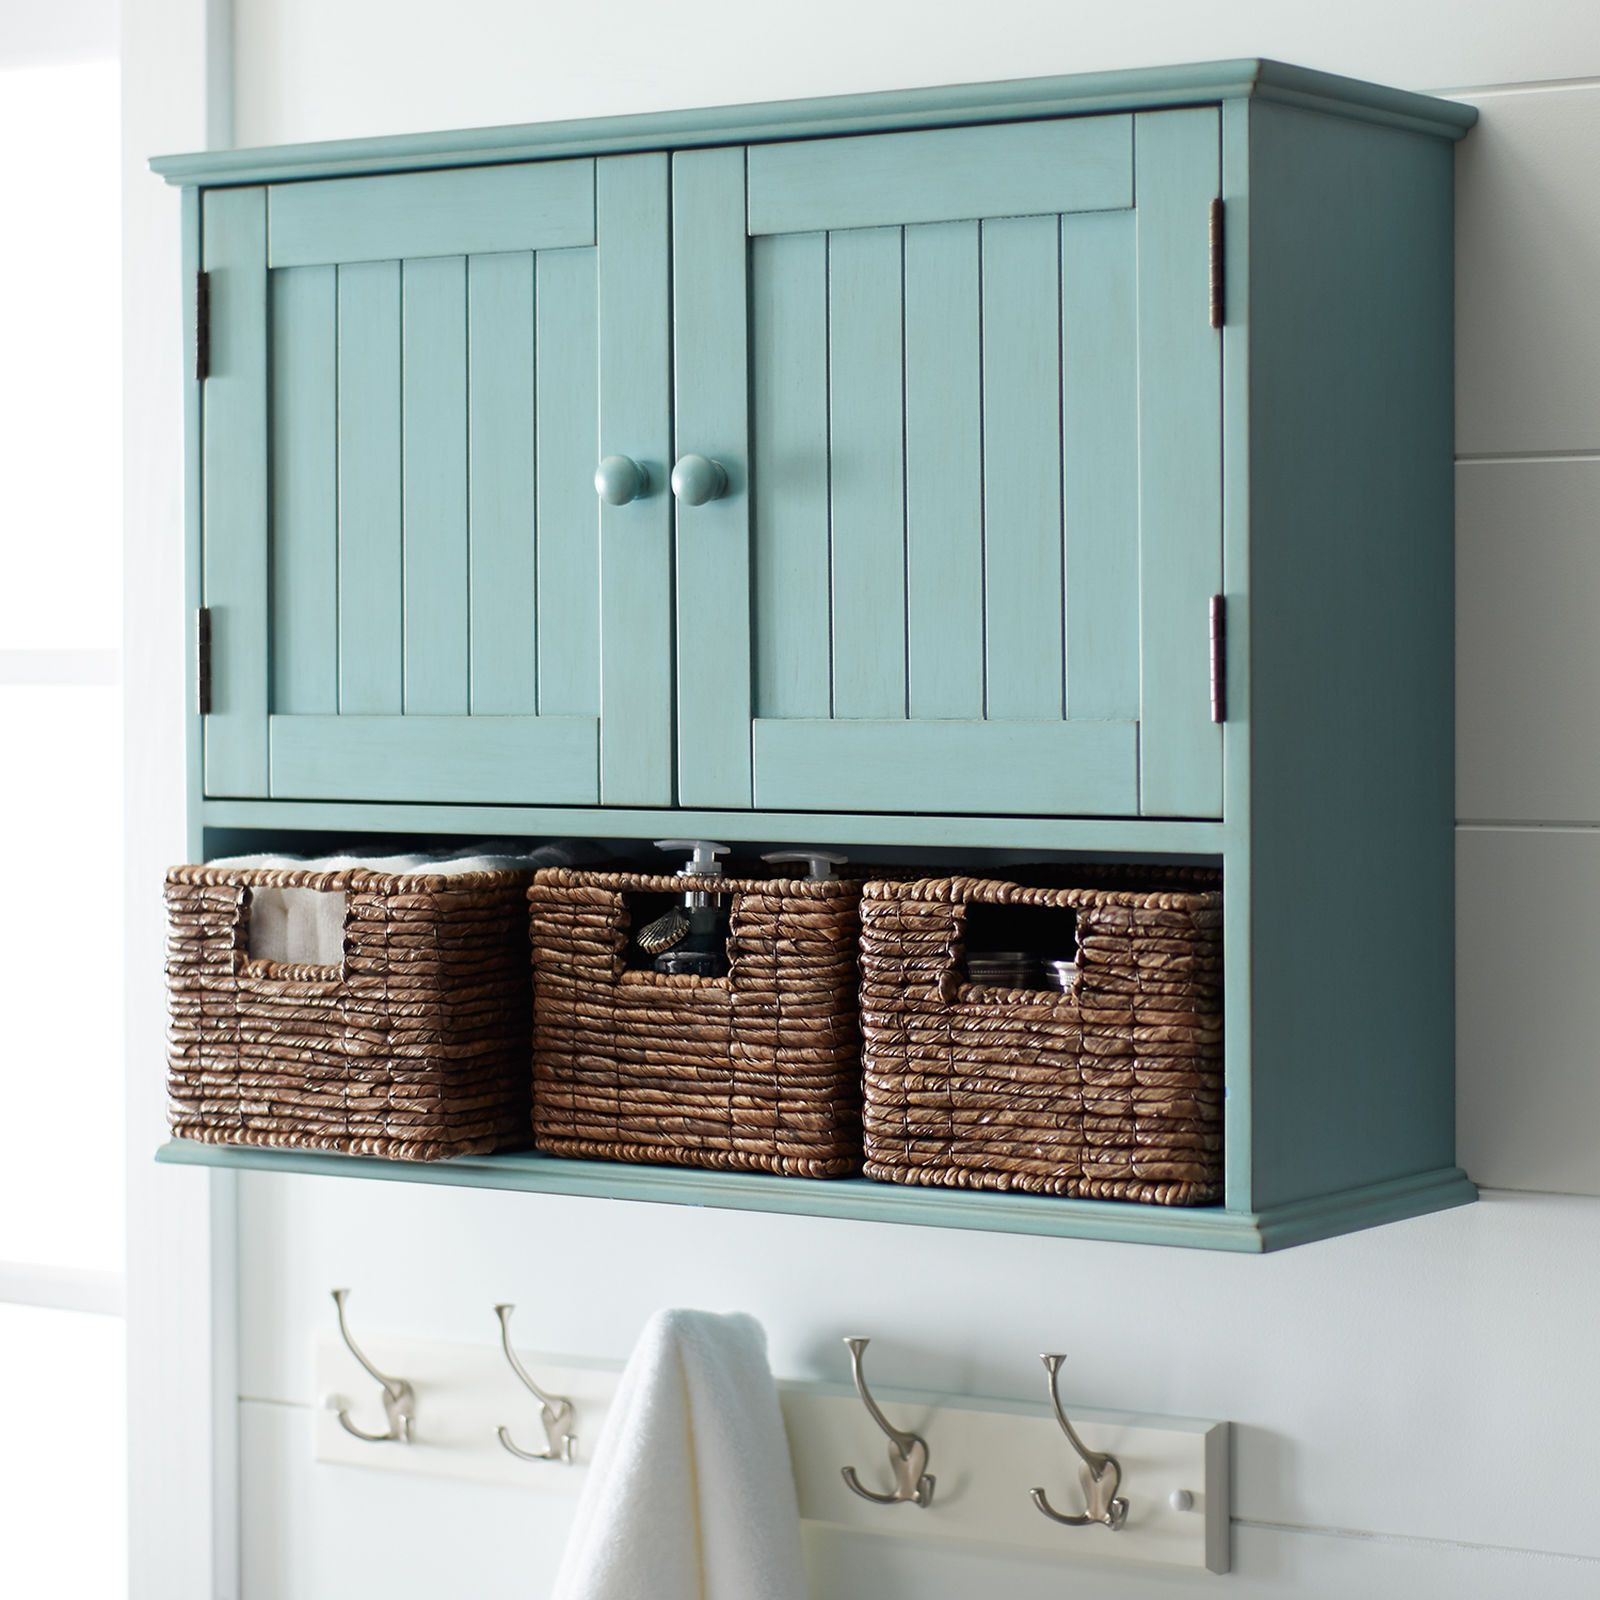 Bathroom Wall Cabinet With Baskets
 Storage doesn t have to be stark Our handsome wood